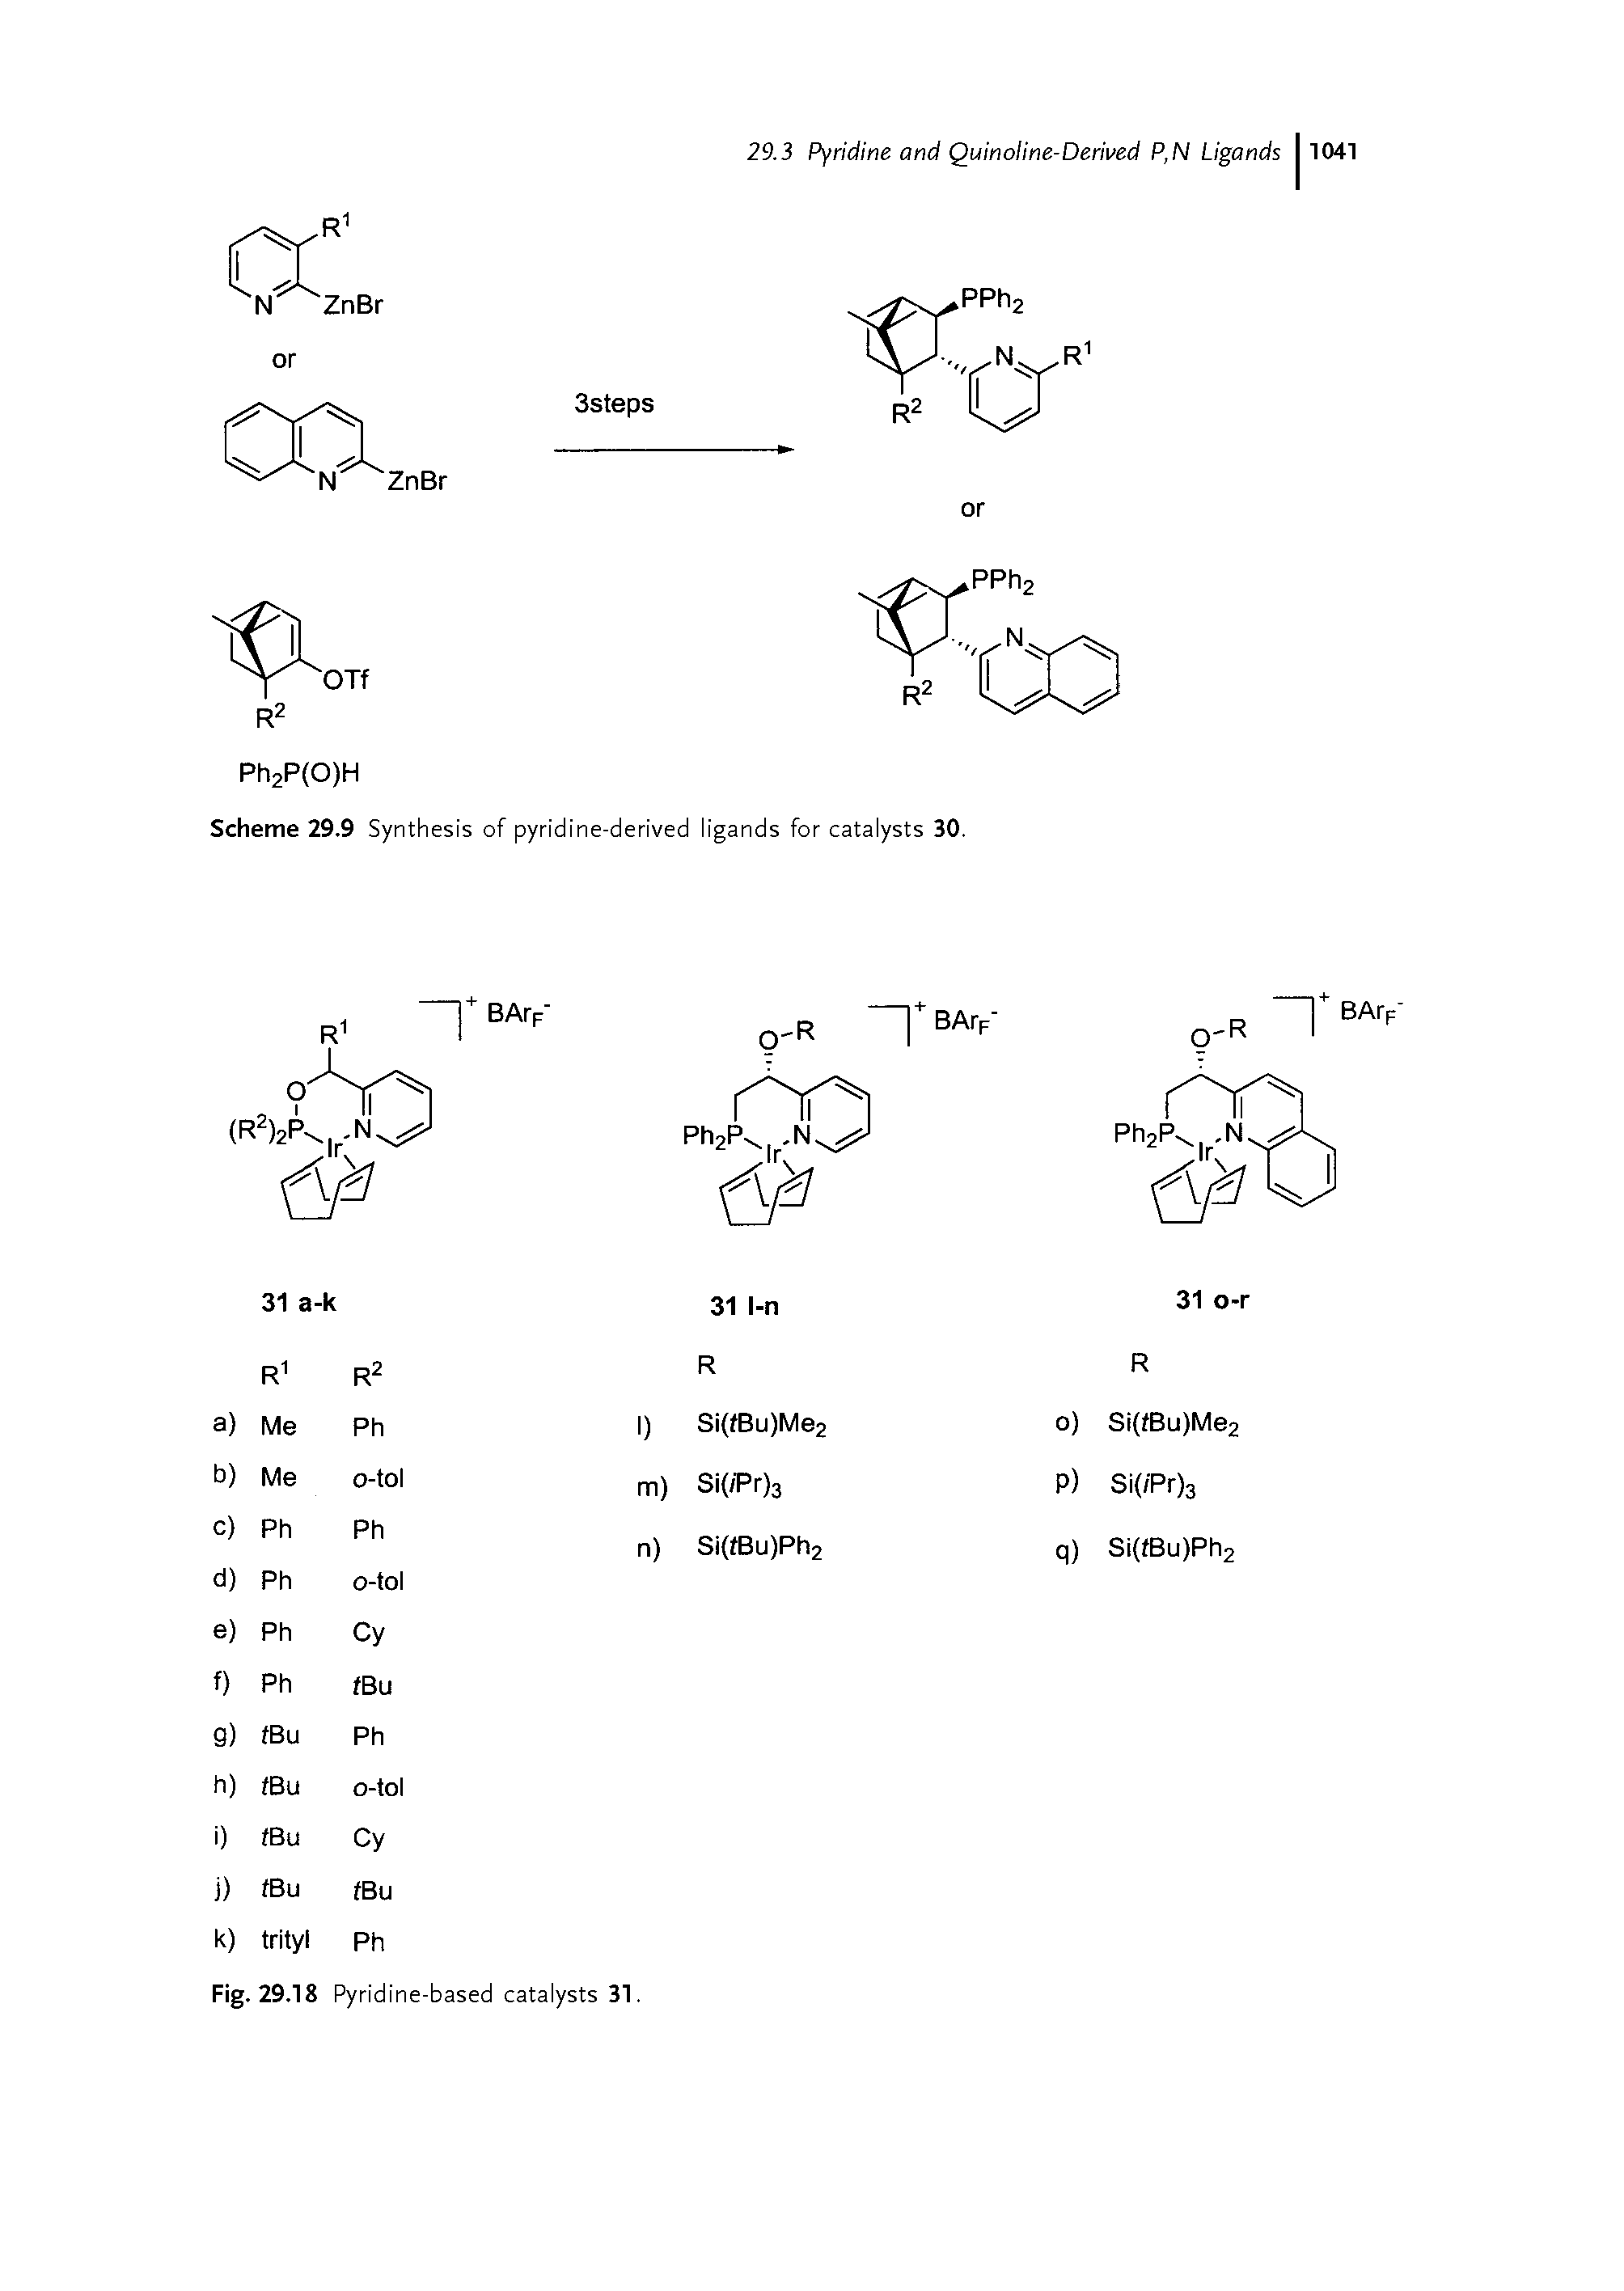 Scheme 29.9 Synthesis of pyridine-derived ligands for catalysts 30.